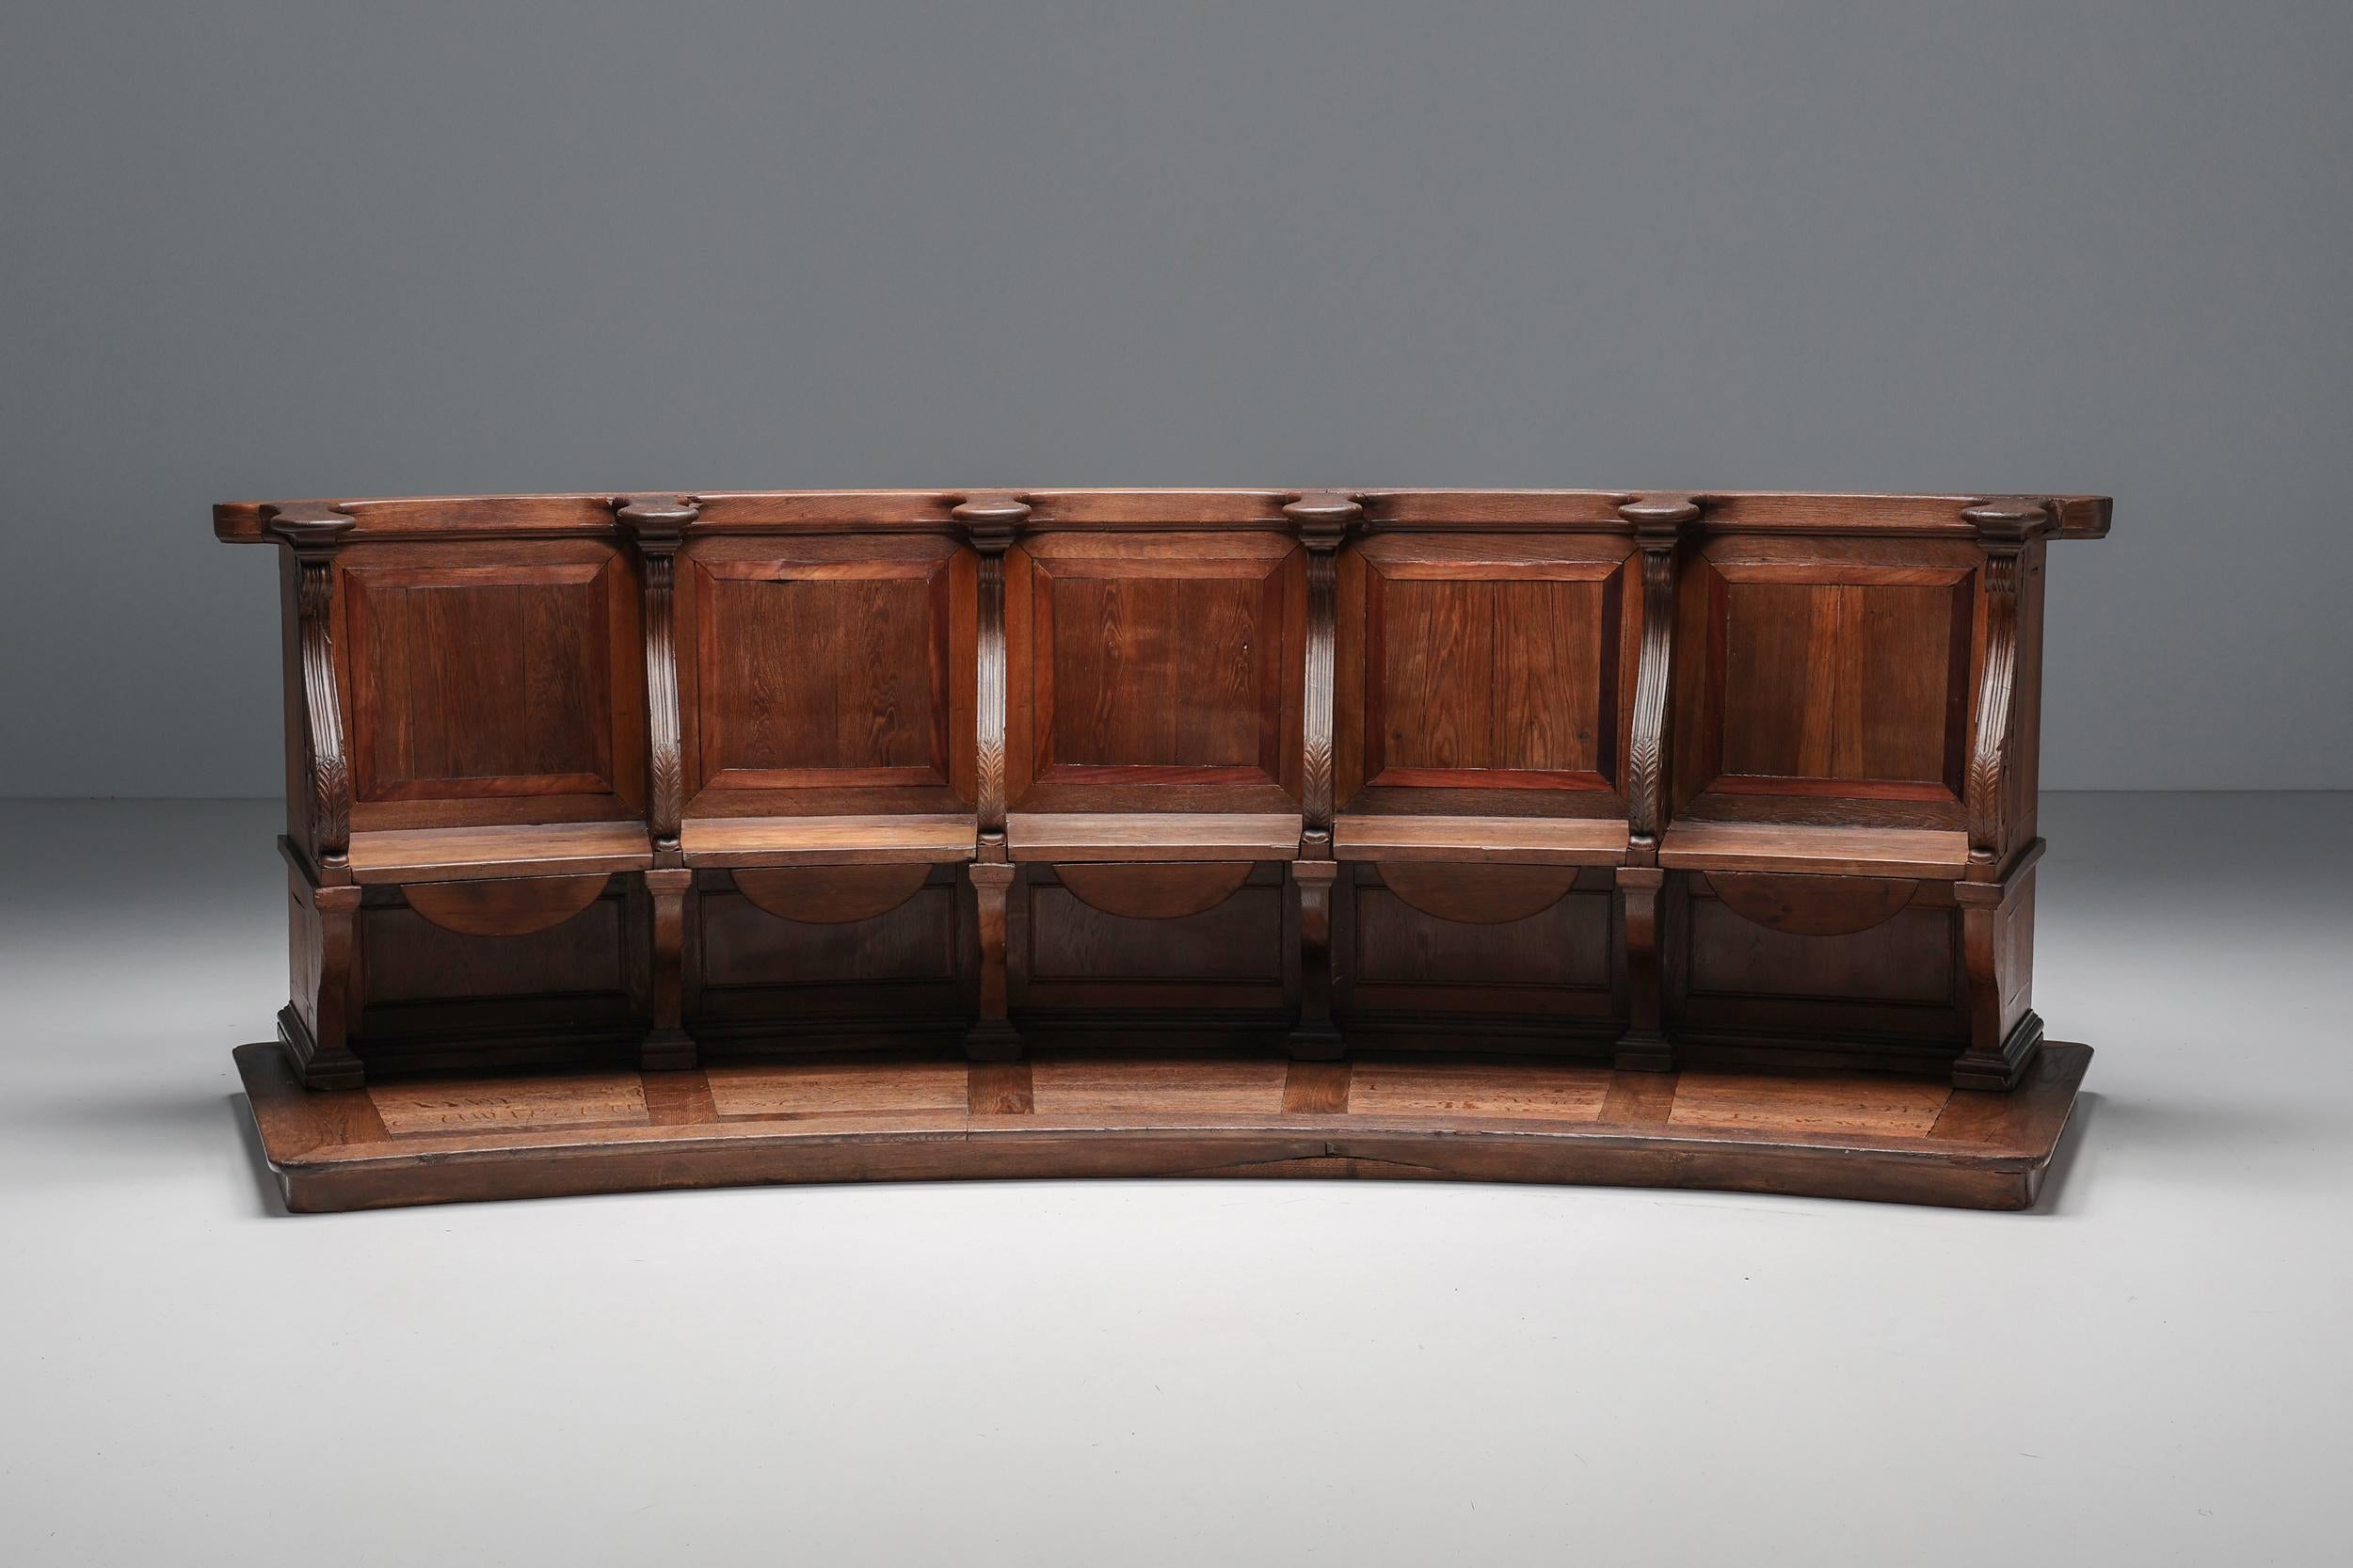 Flemish 18th century church pew, crafted from thick and solid oak wood. A remarkable and unusual piece, featuring curved sides and carved details. Originally, these pieces were used as real church pews, which gives them a historic value and feel.